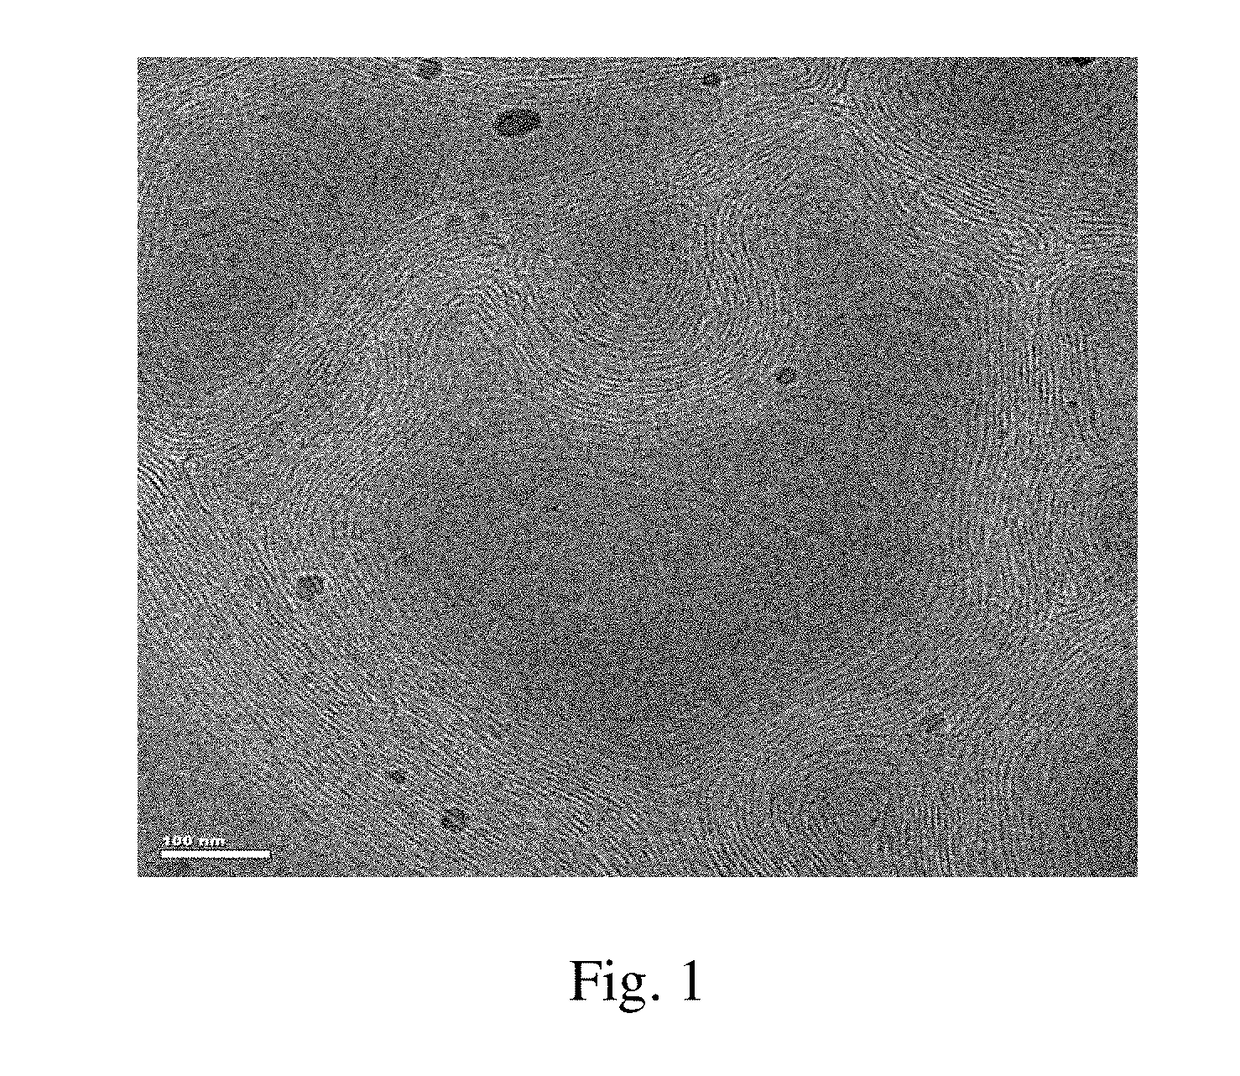 Stable liquid detergent composition containing a self-structuring surfactant system